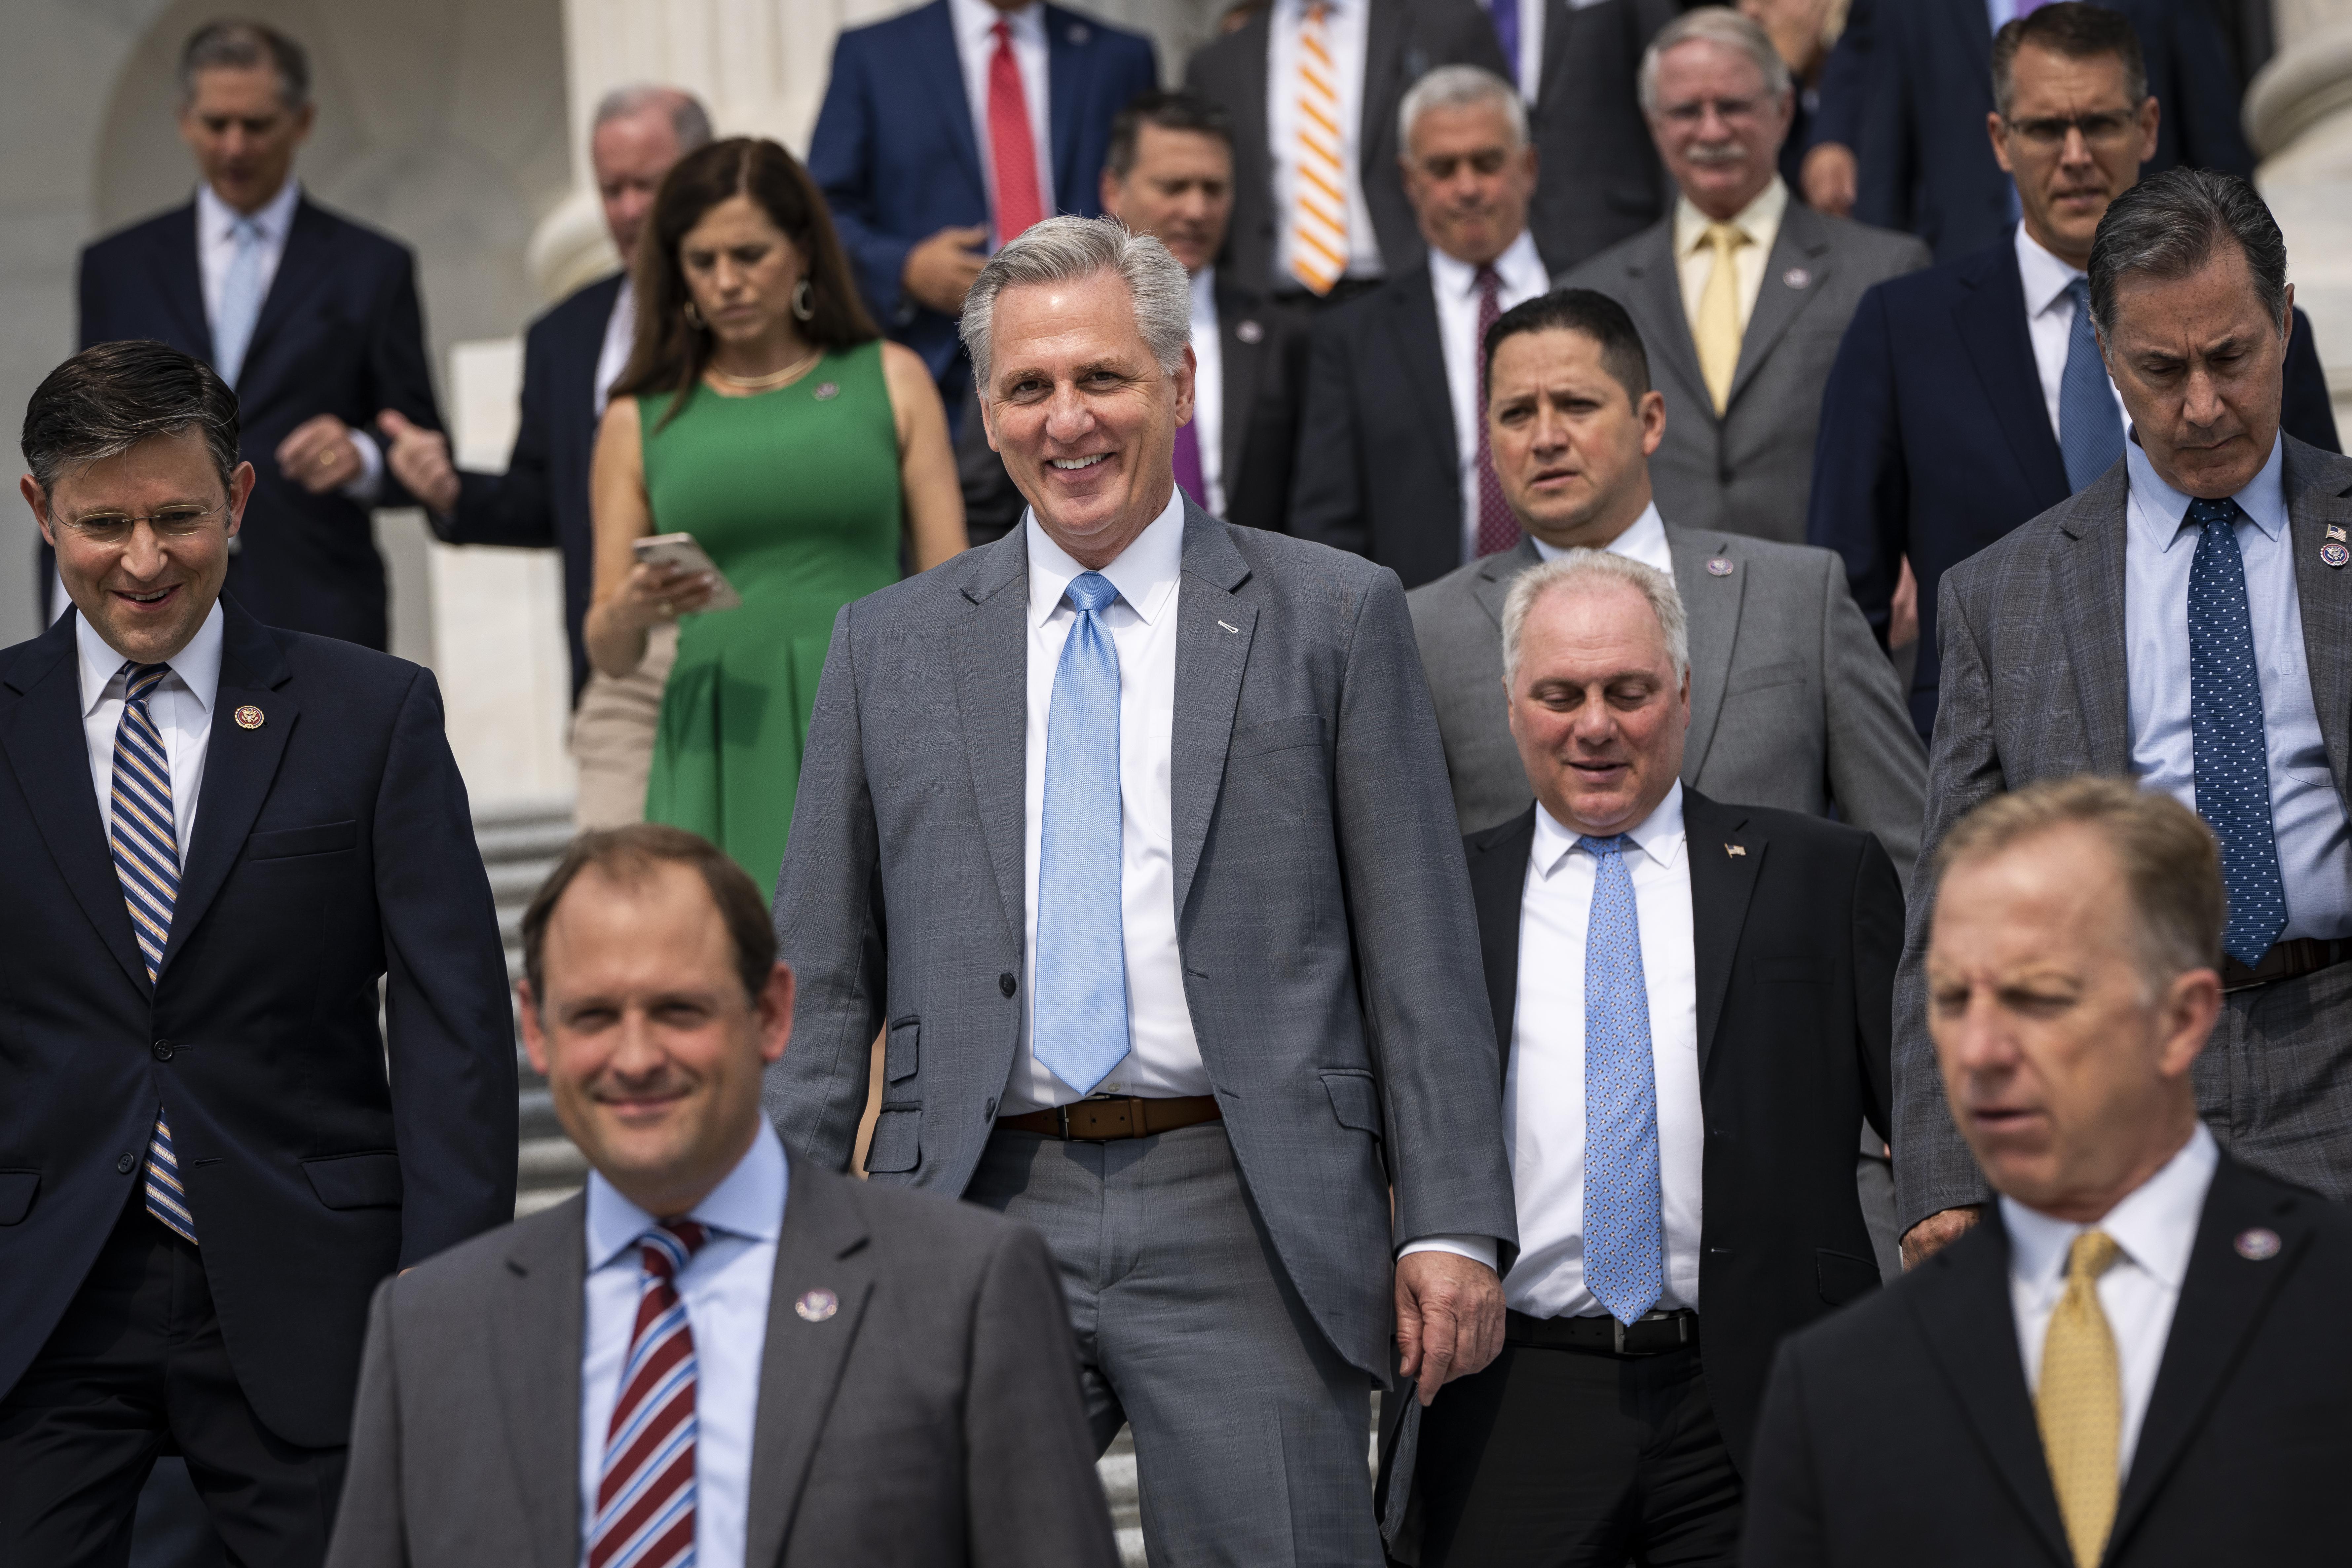 A bunch of old white men in suits walking down stairs, along with one white woman